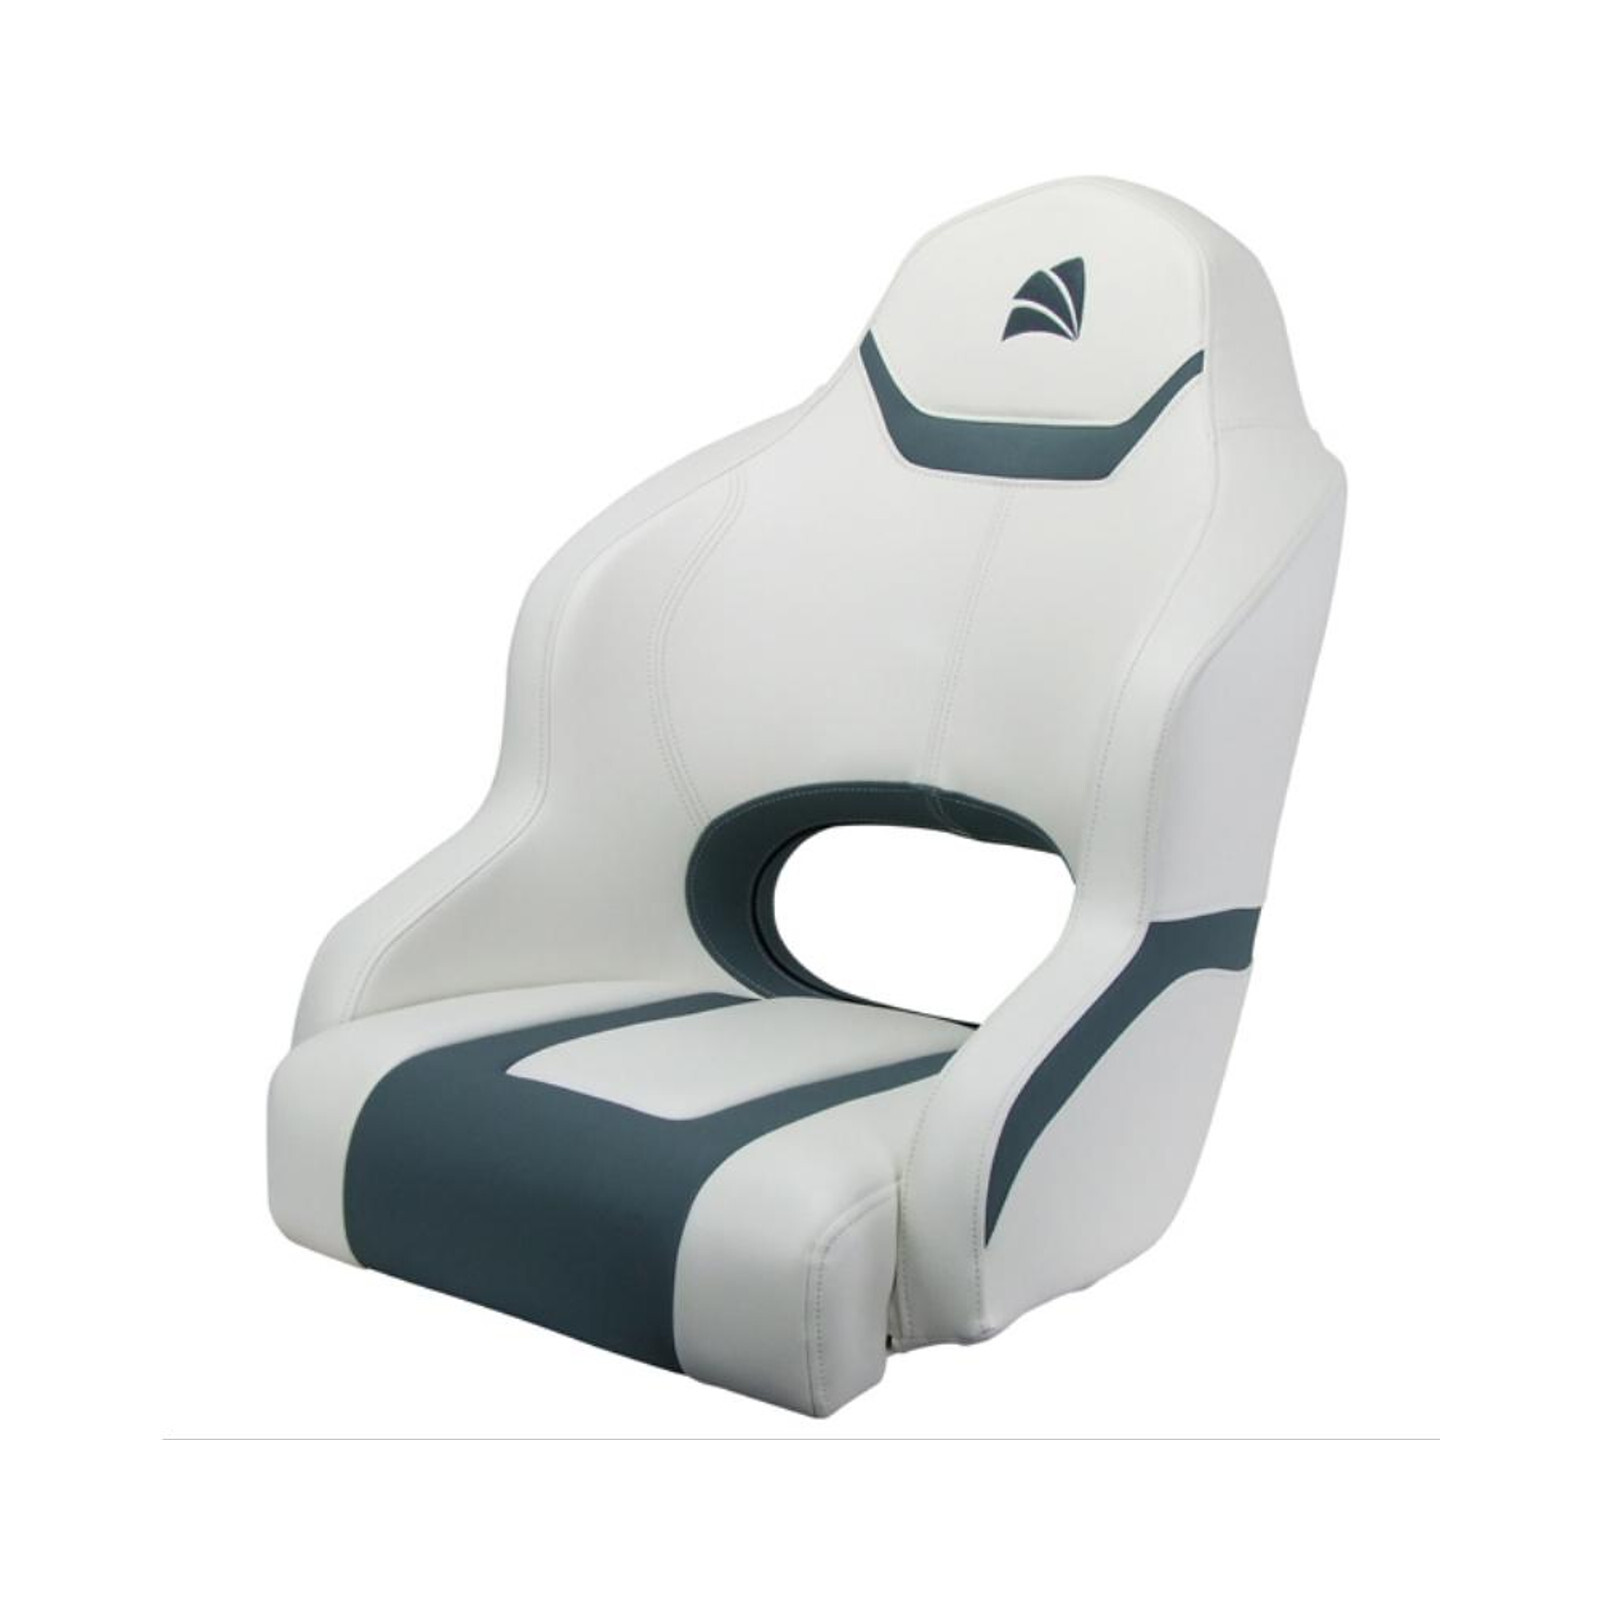 Sports Bucket Boat Seat - Reef Series (Relaxn) White/Grey